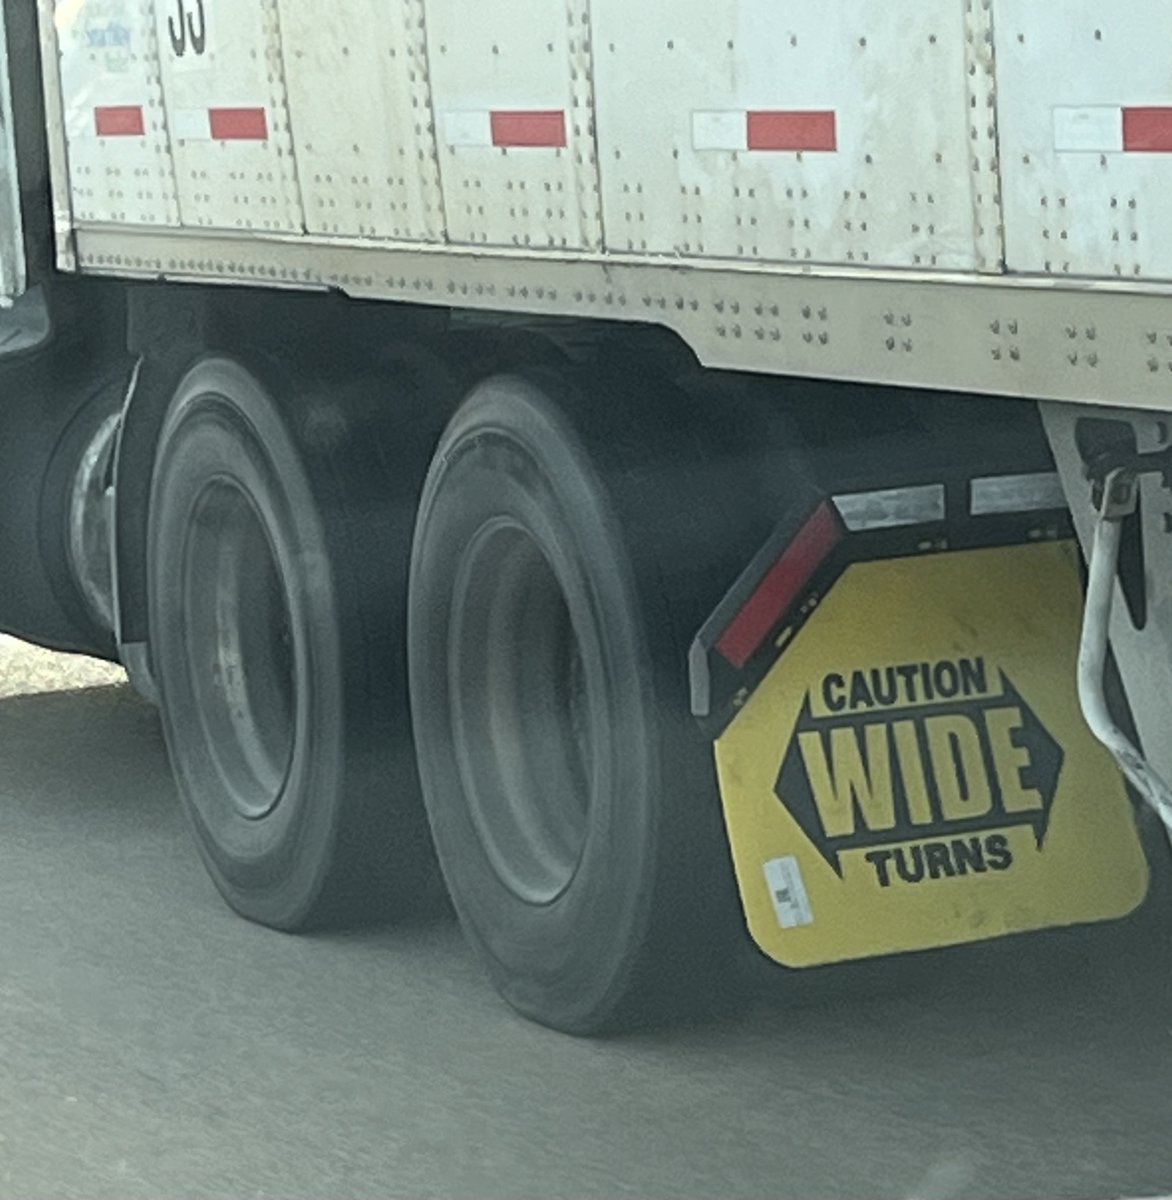 Driver side messaging for those around the vehicle.  Good job Carrier!  Use the landscape you have to communicate to those around you.
#CautionWideTurns #SafetySigns #DriverSide #MudFlapCulture #WideTurns #SafeLeadership